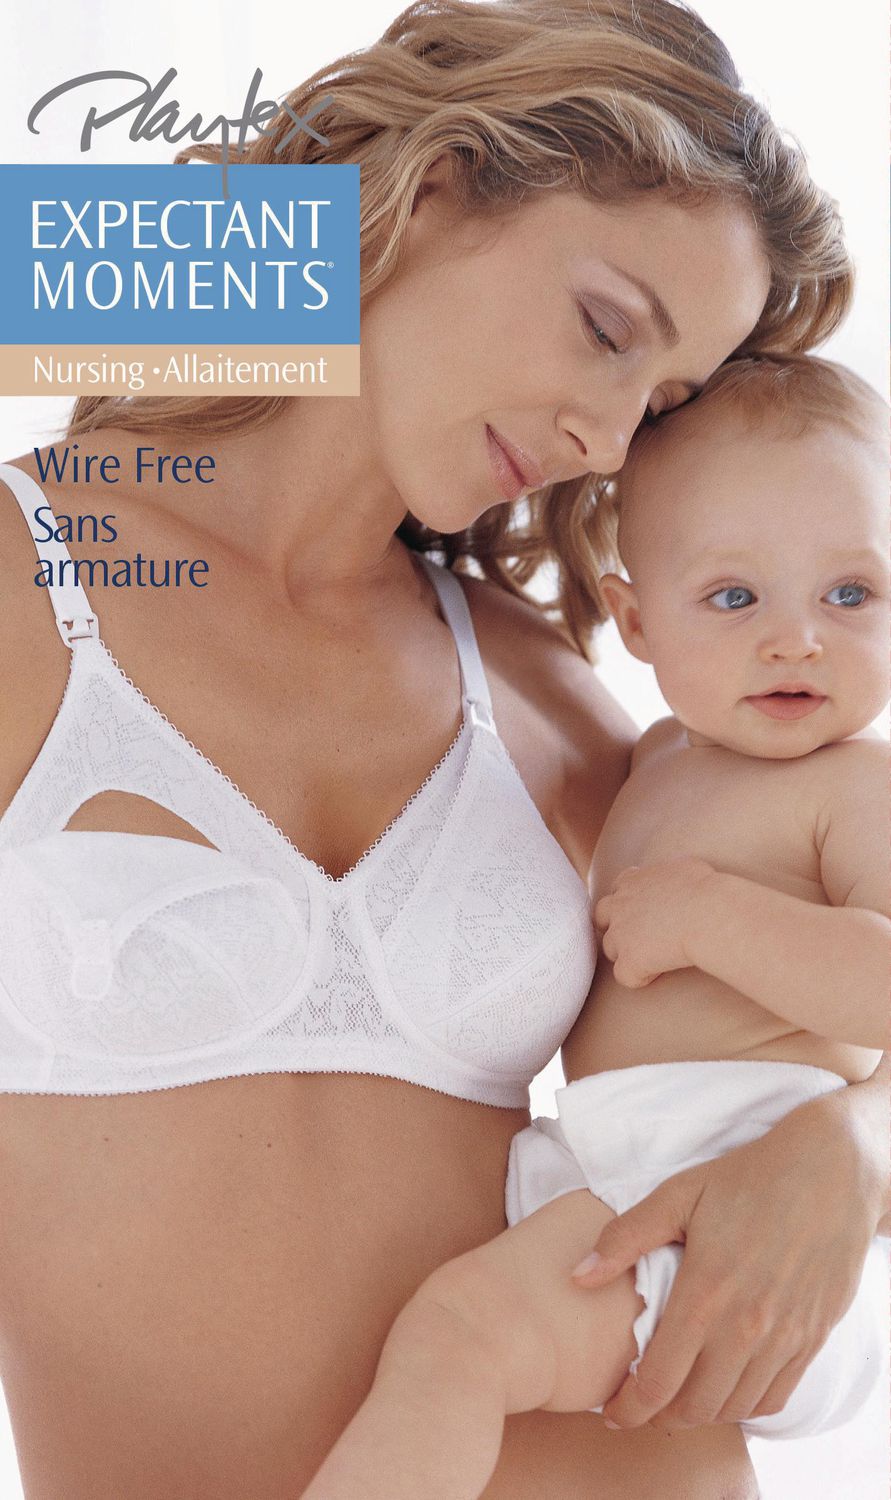 Playtex – Expectant Moments  Baby Care Tips & Informations - Oh Baby  Magazine Canada